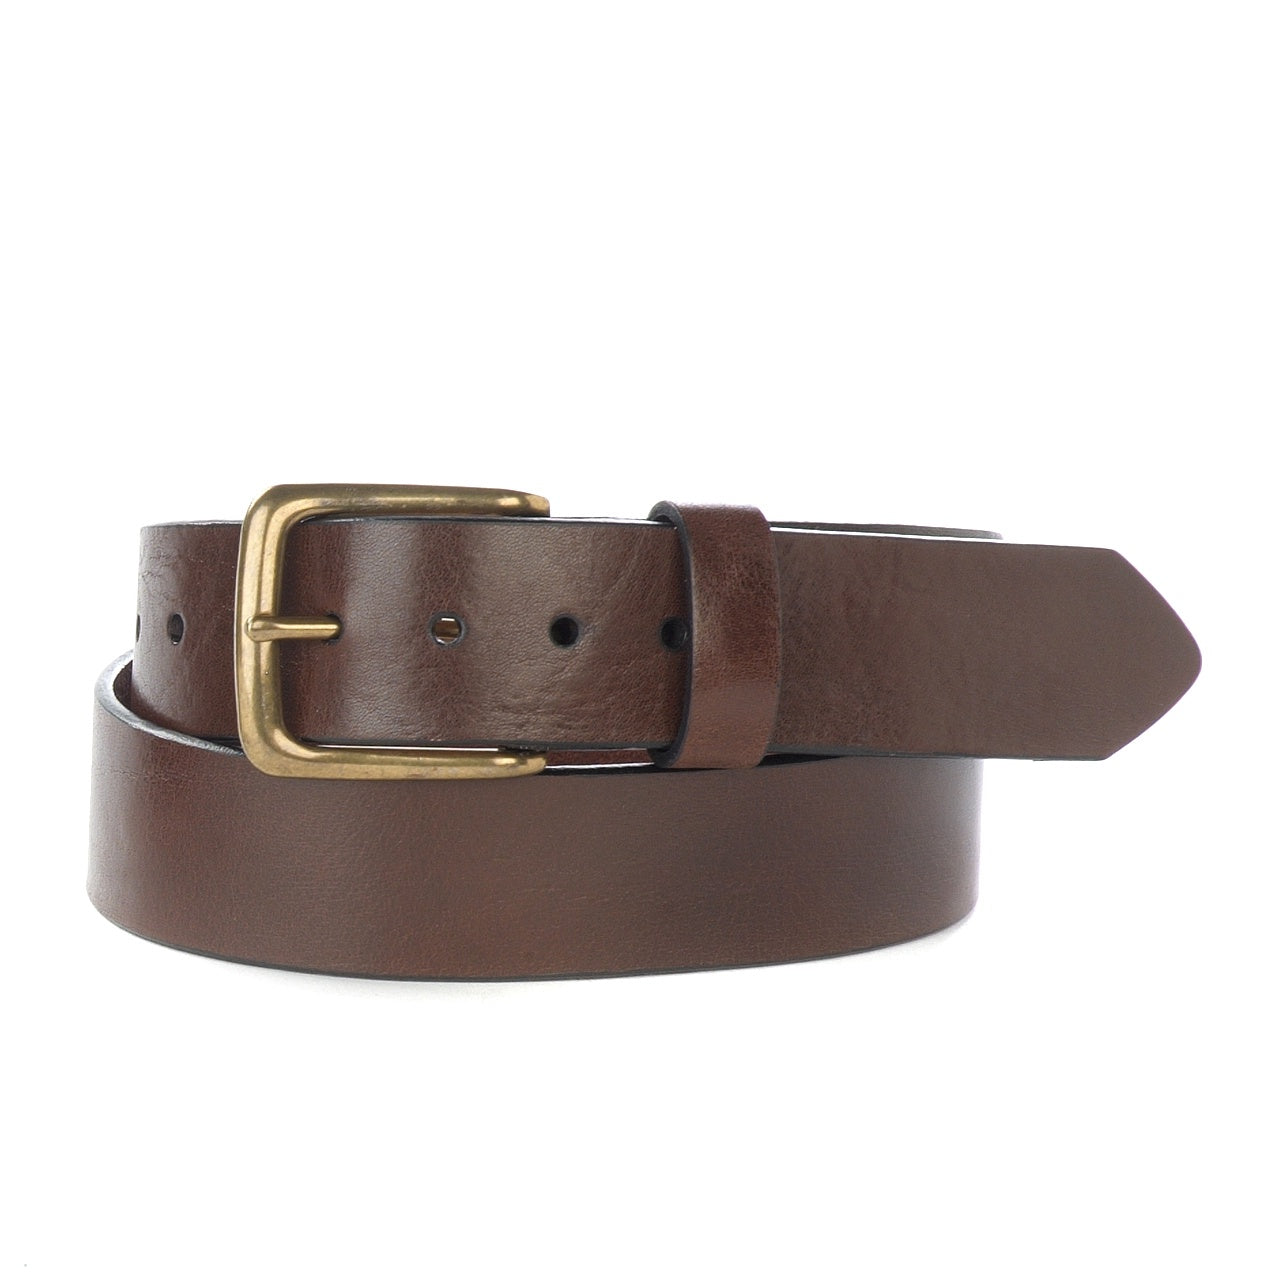 Brave Mens Duccio belt in brown with silver buckle